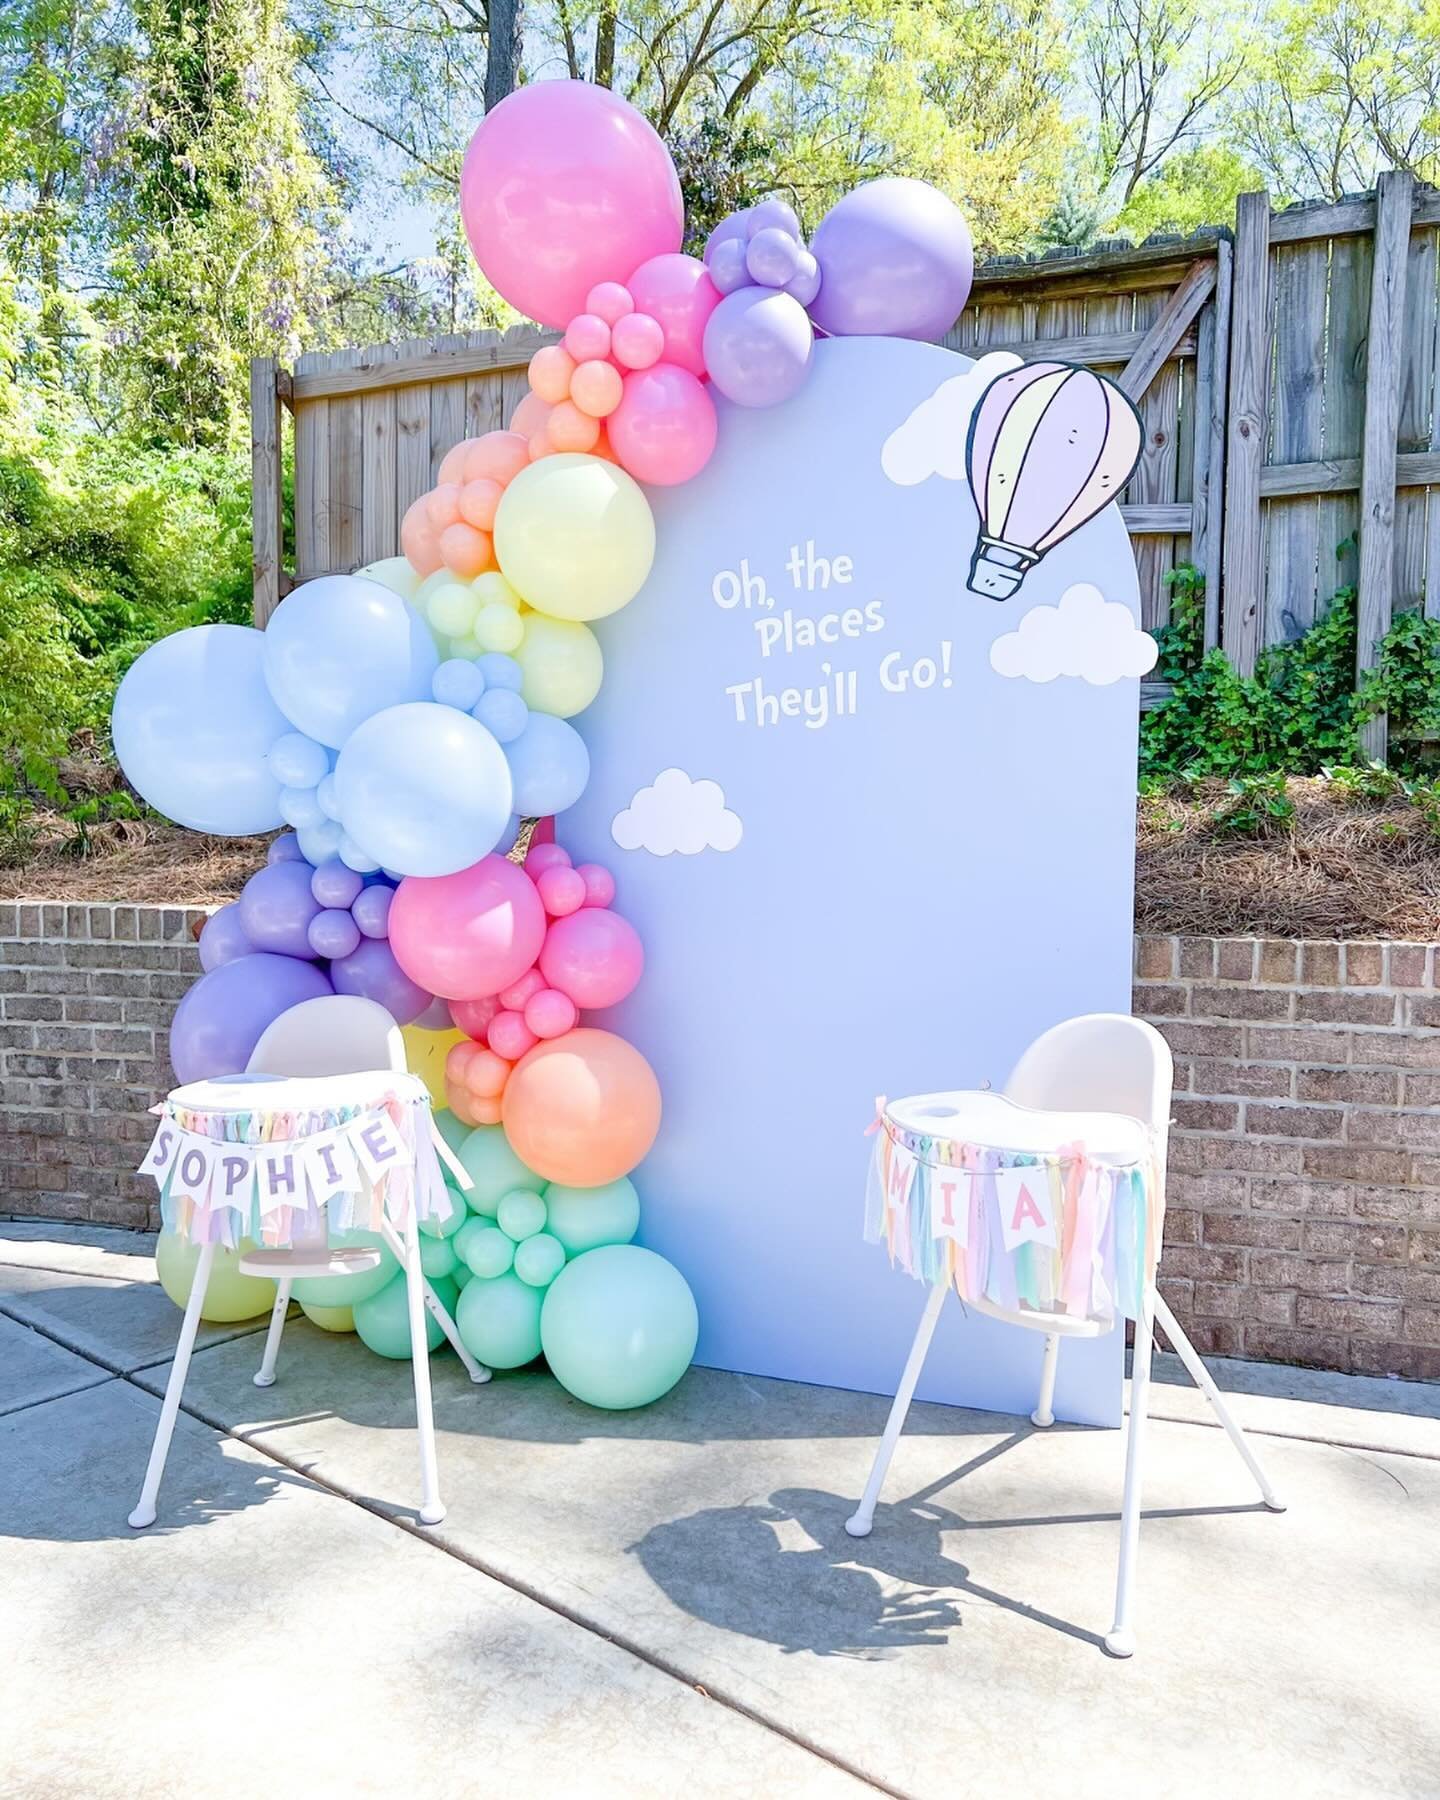 Stepping into the pages of a Dr. Seuss classic 🌤️📚 

From Thing 1 and Thing 2 to Horton&rsquo;s big heart, we brought Dr. Seuss&rsquo;s magical world to life in honor of two twin sister&rsquo;s first birthday.

And just wait until you see the Truff